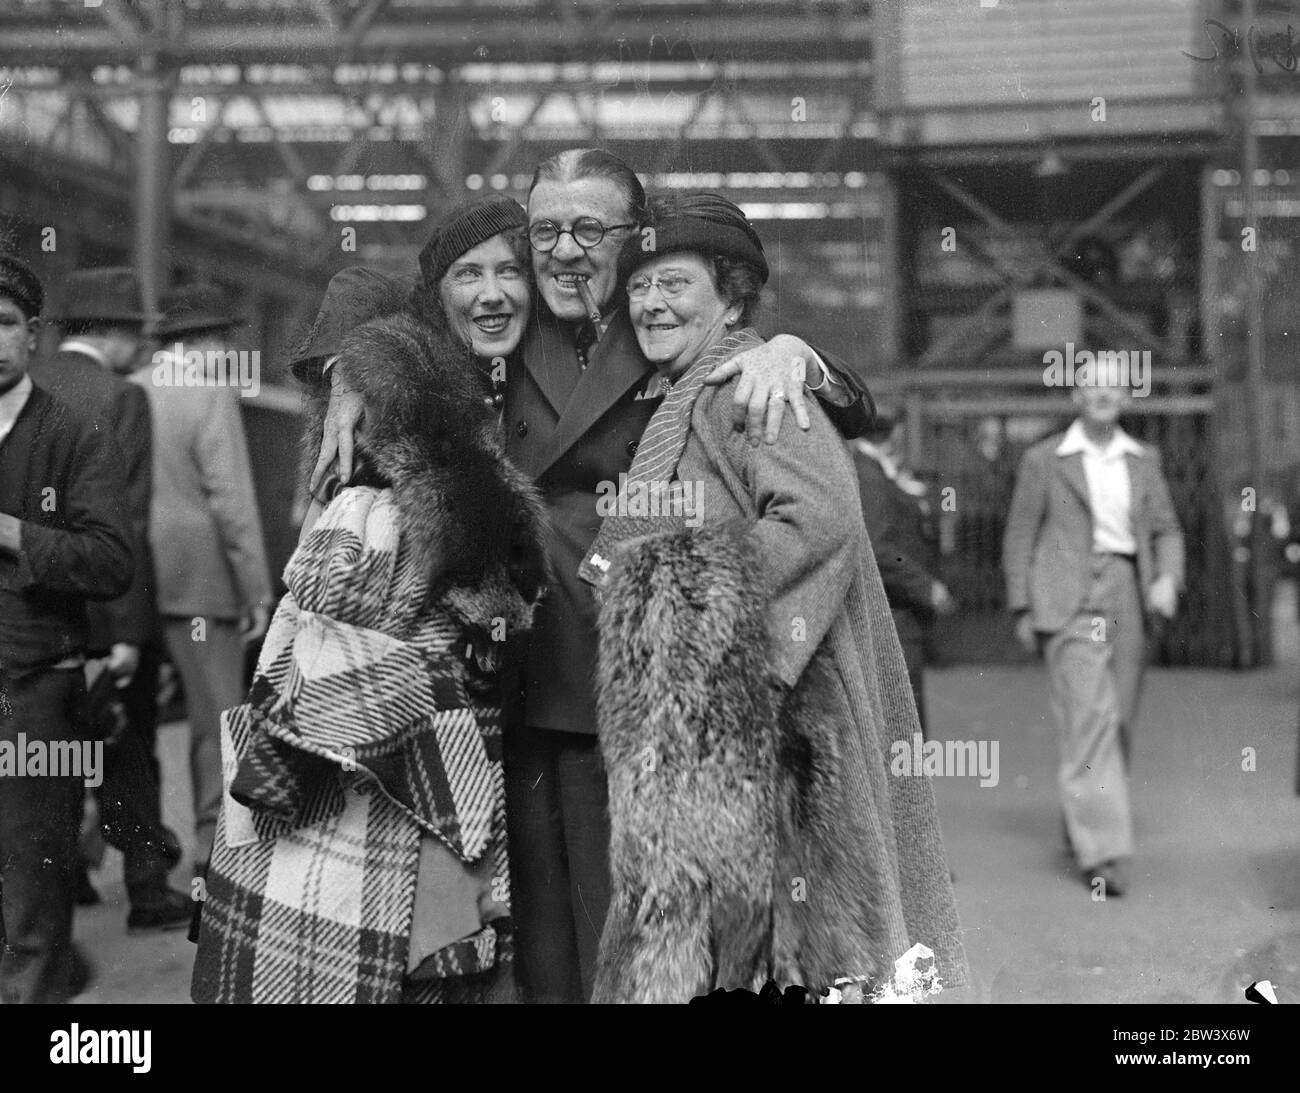 Woolsey , of Wheeler and Woolsey , welcome his wife and mother to London . Robert Woolsey , of Wheeler and Woolsey , the film comedian , was at Waterloo Station to welcome his wife and mother when they arrived on the ' Normandie ' boat train from America . Photo shows , Robert Woolsey , smoking a cigar as usual , with his wife , and mother on their arrival at Waterloo . 24 August 1936 Original caption from negative Stock Photo